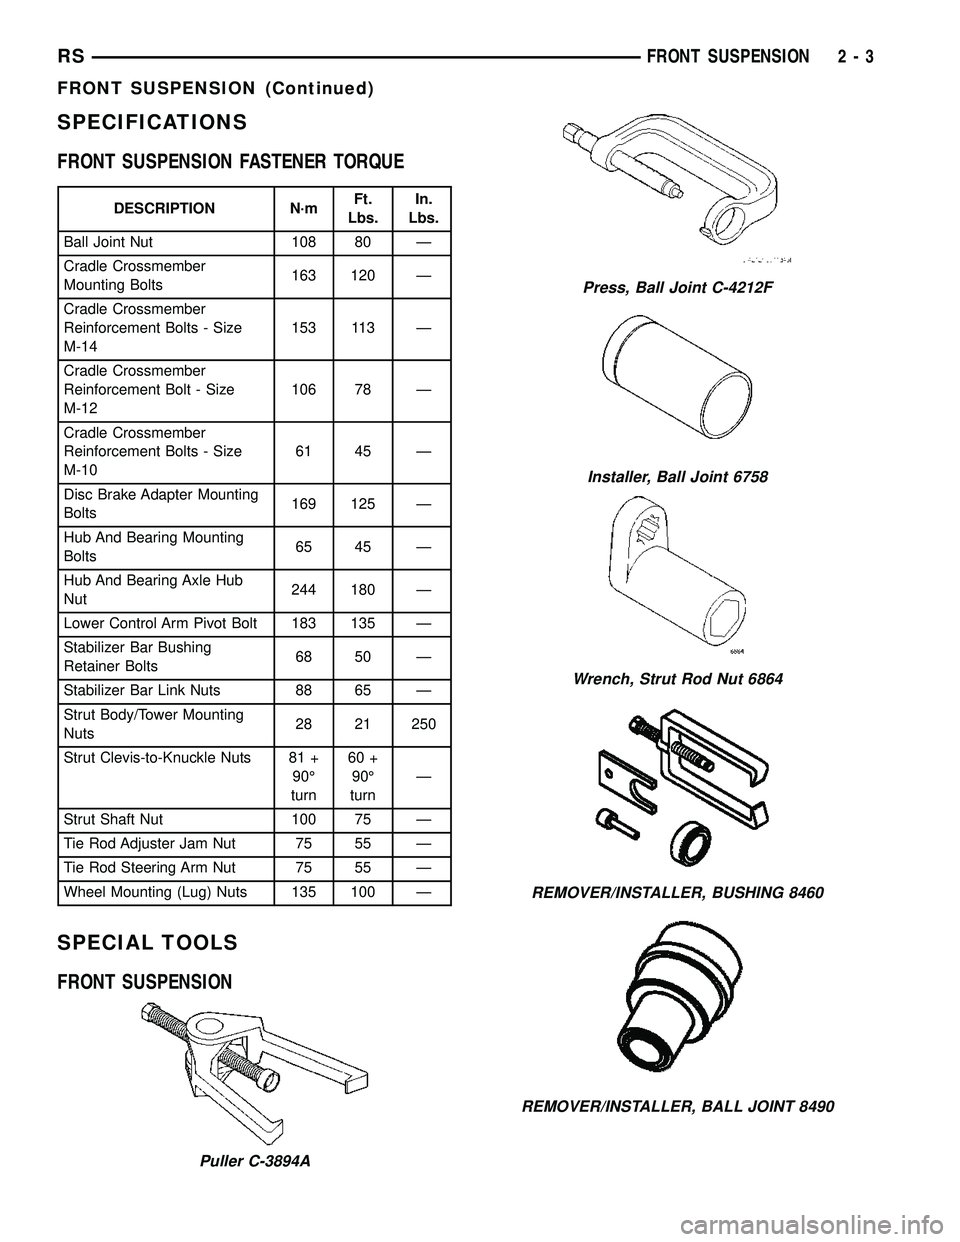 DODGE TOWN AND COUNTRY 2004 Workshop Manual SPECIFICATIONS
FRONT SUSPENSION FASTENER TORQUE
DESCRIPTION N´mFt.
Lbs.In.
Lbs.
Ball Joint Nut 108 80 Ð
Cradle Crossmember
Mounting Bolts163 120 Ð
Cradle Crossmember
Reinforcement Bolts - Size
M-14